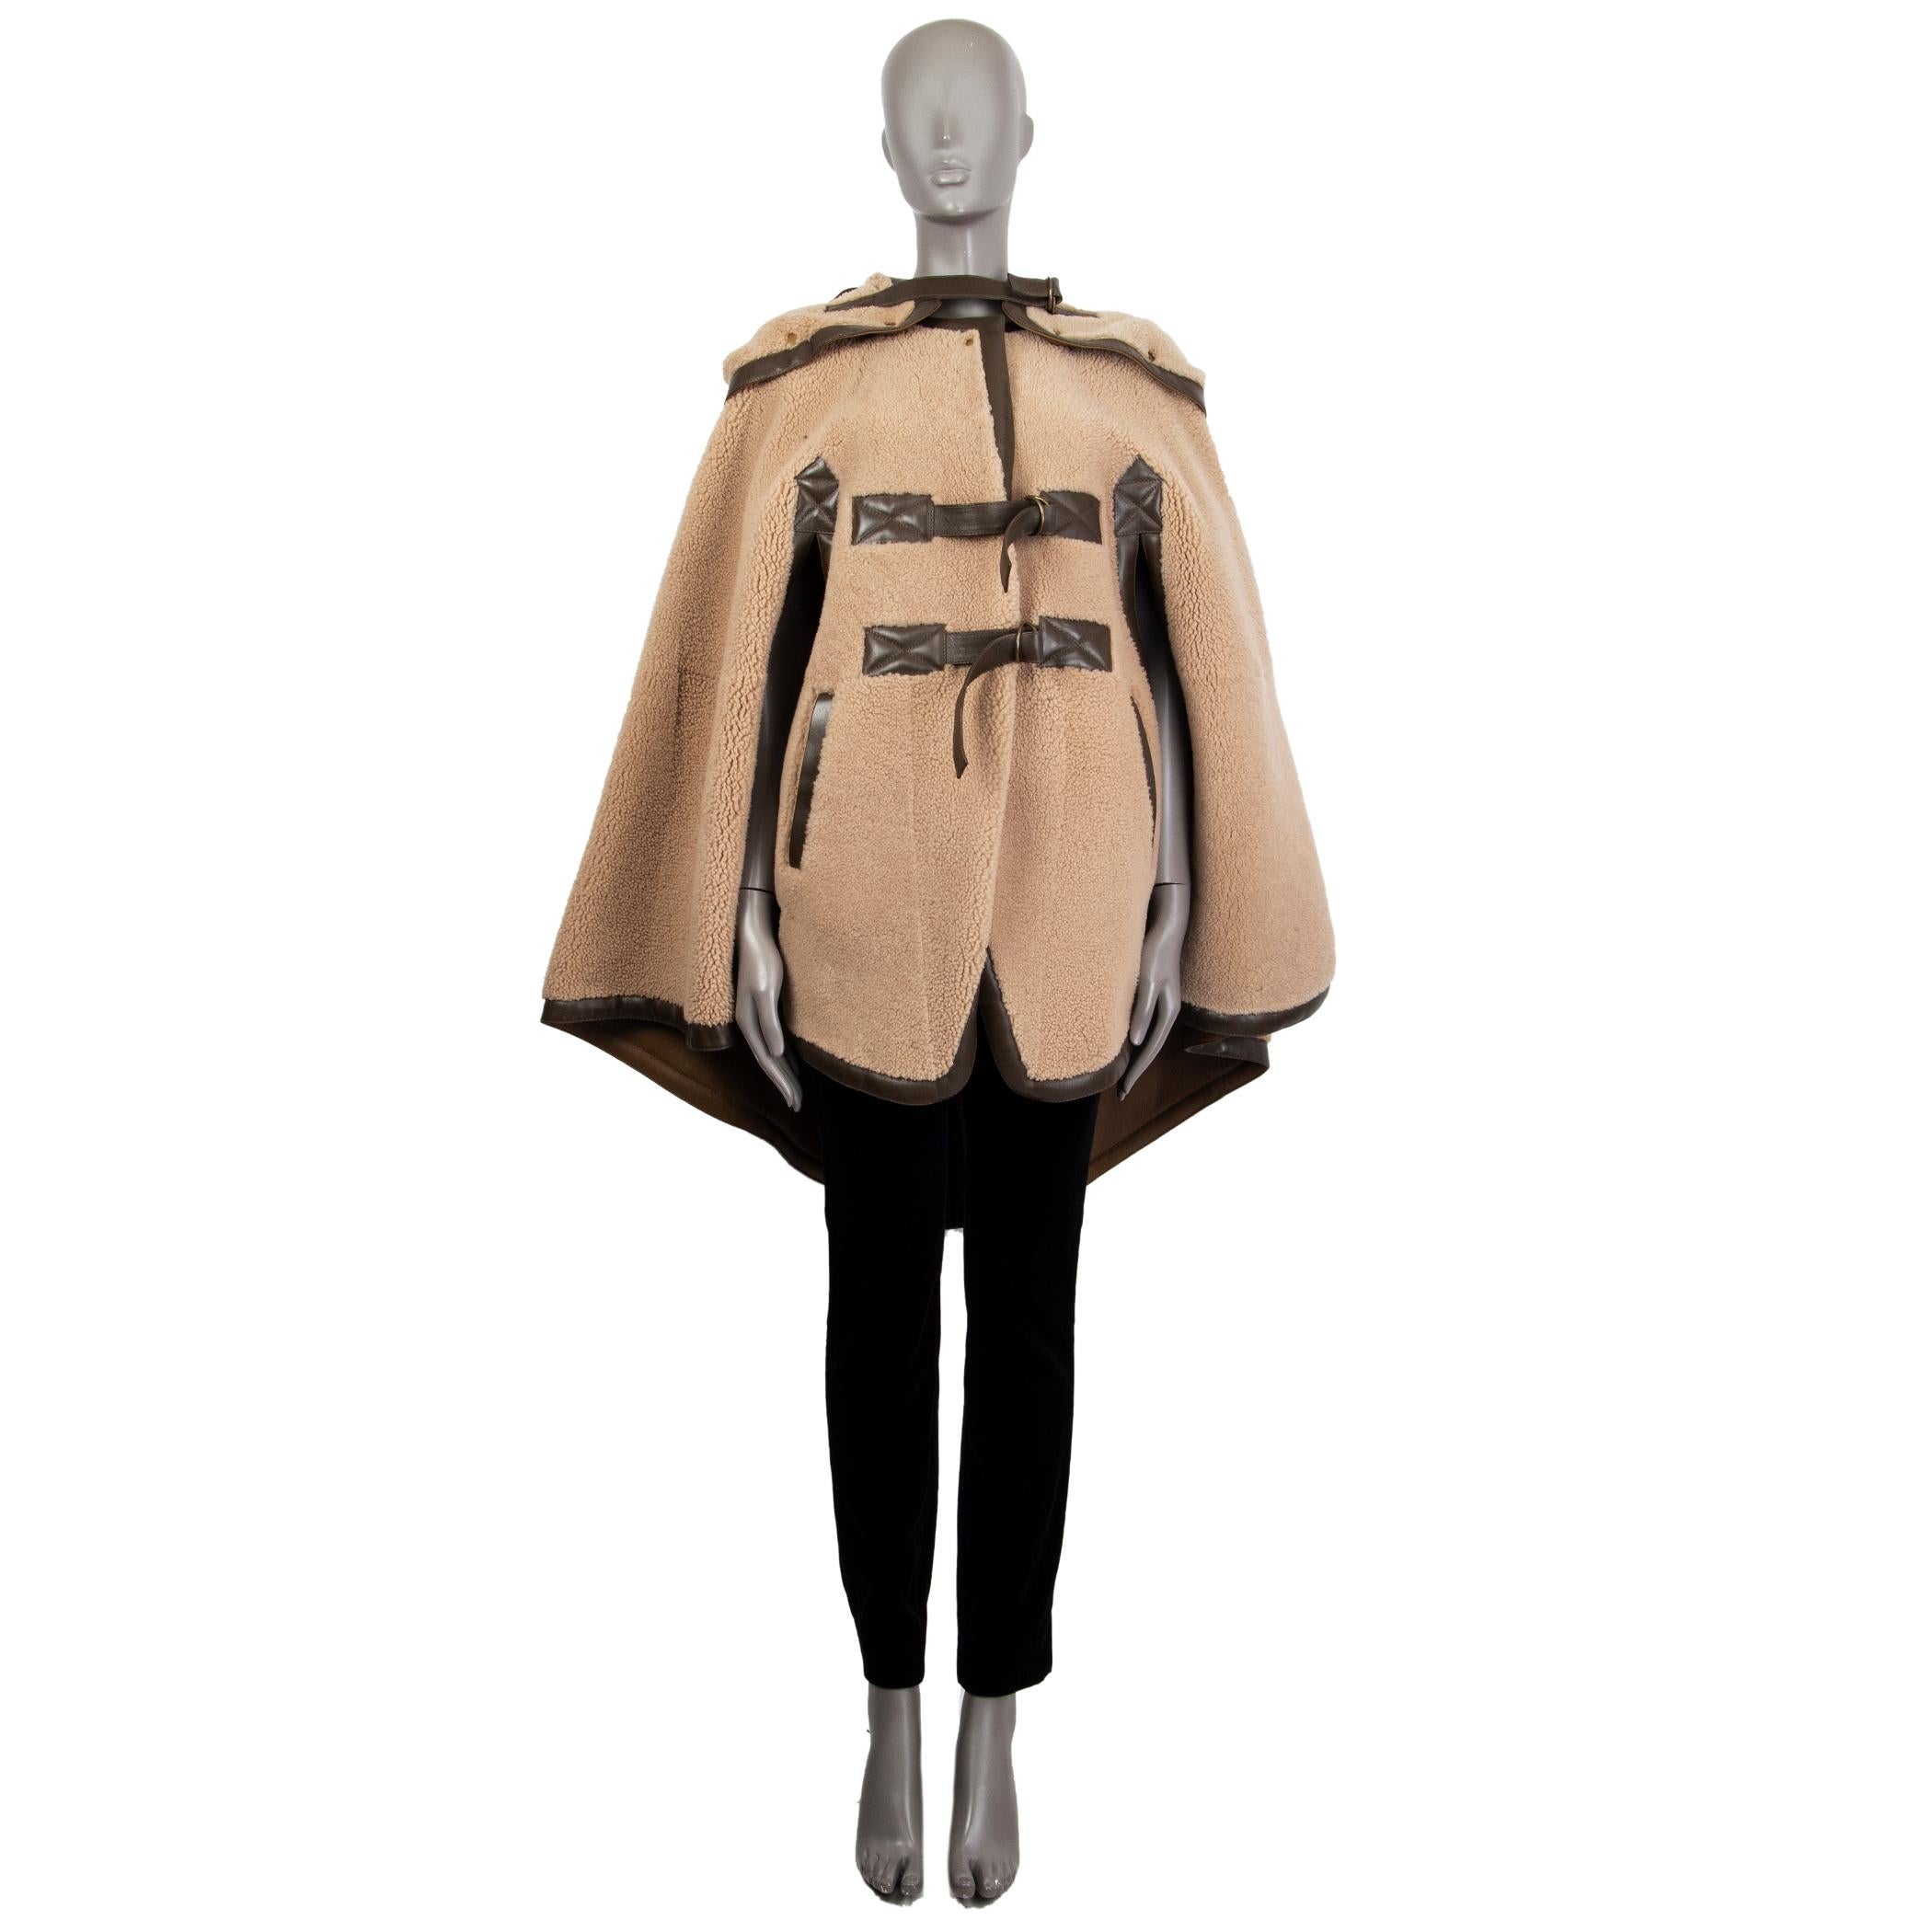 authentic Chloé cape in camel and olive green shearling with two slit pockets on the front. Has a detachable hood that can be worn over the shoulders. Its hood zipps open and has brass tone snap buttons. Closes on the front with two adjustable